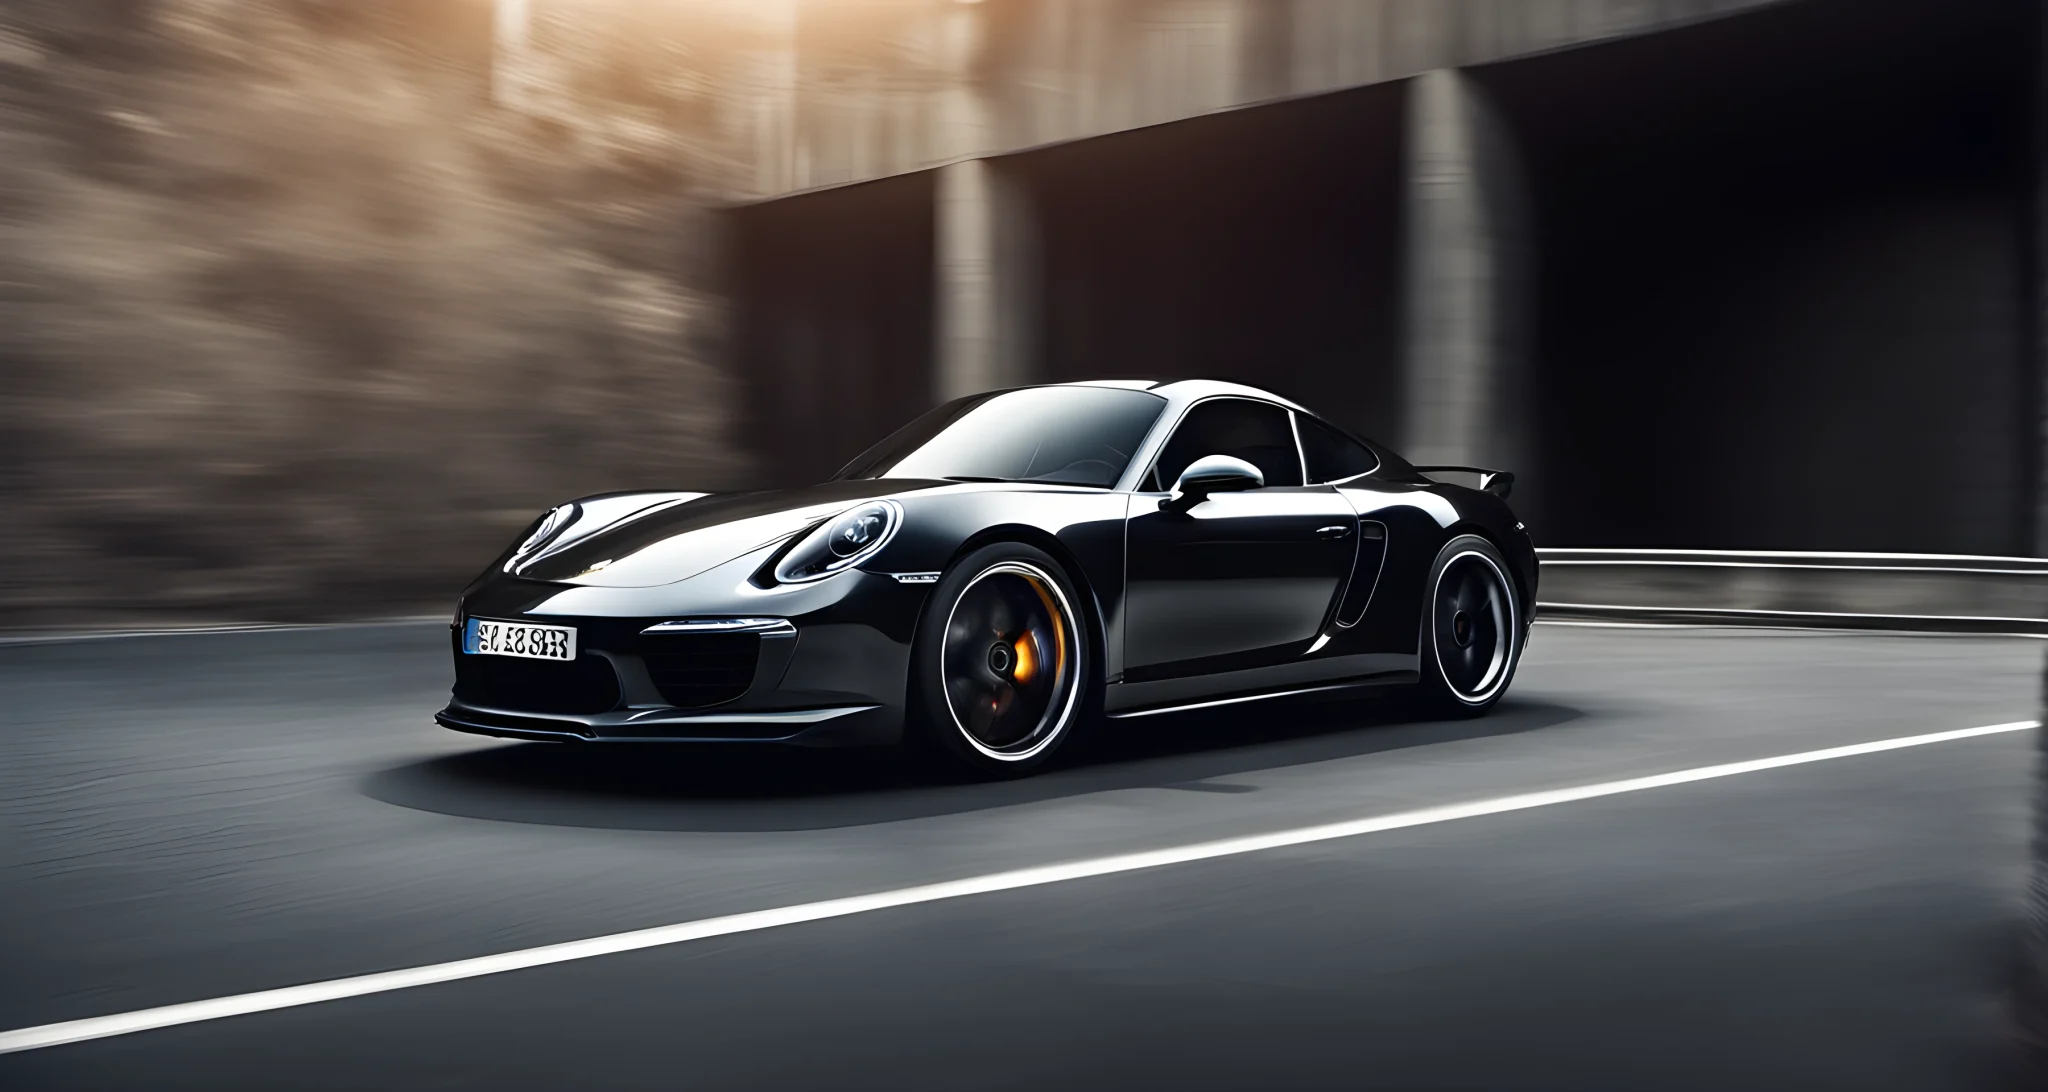 The image features a sleek, high-performance Porsche sports car with a powerful engine and advanced transmission system.